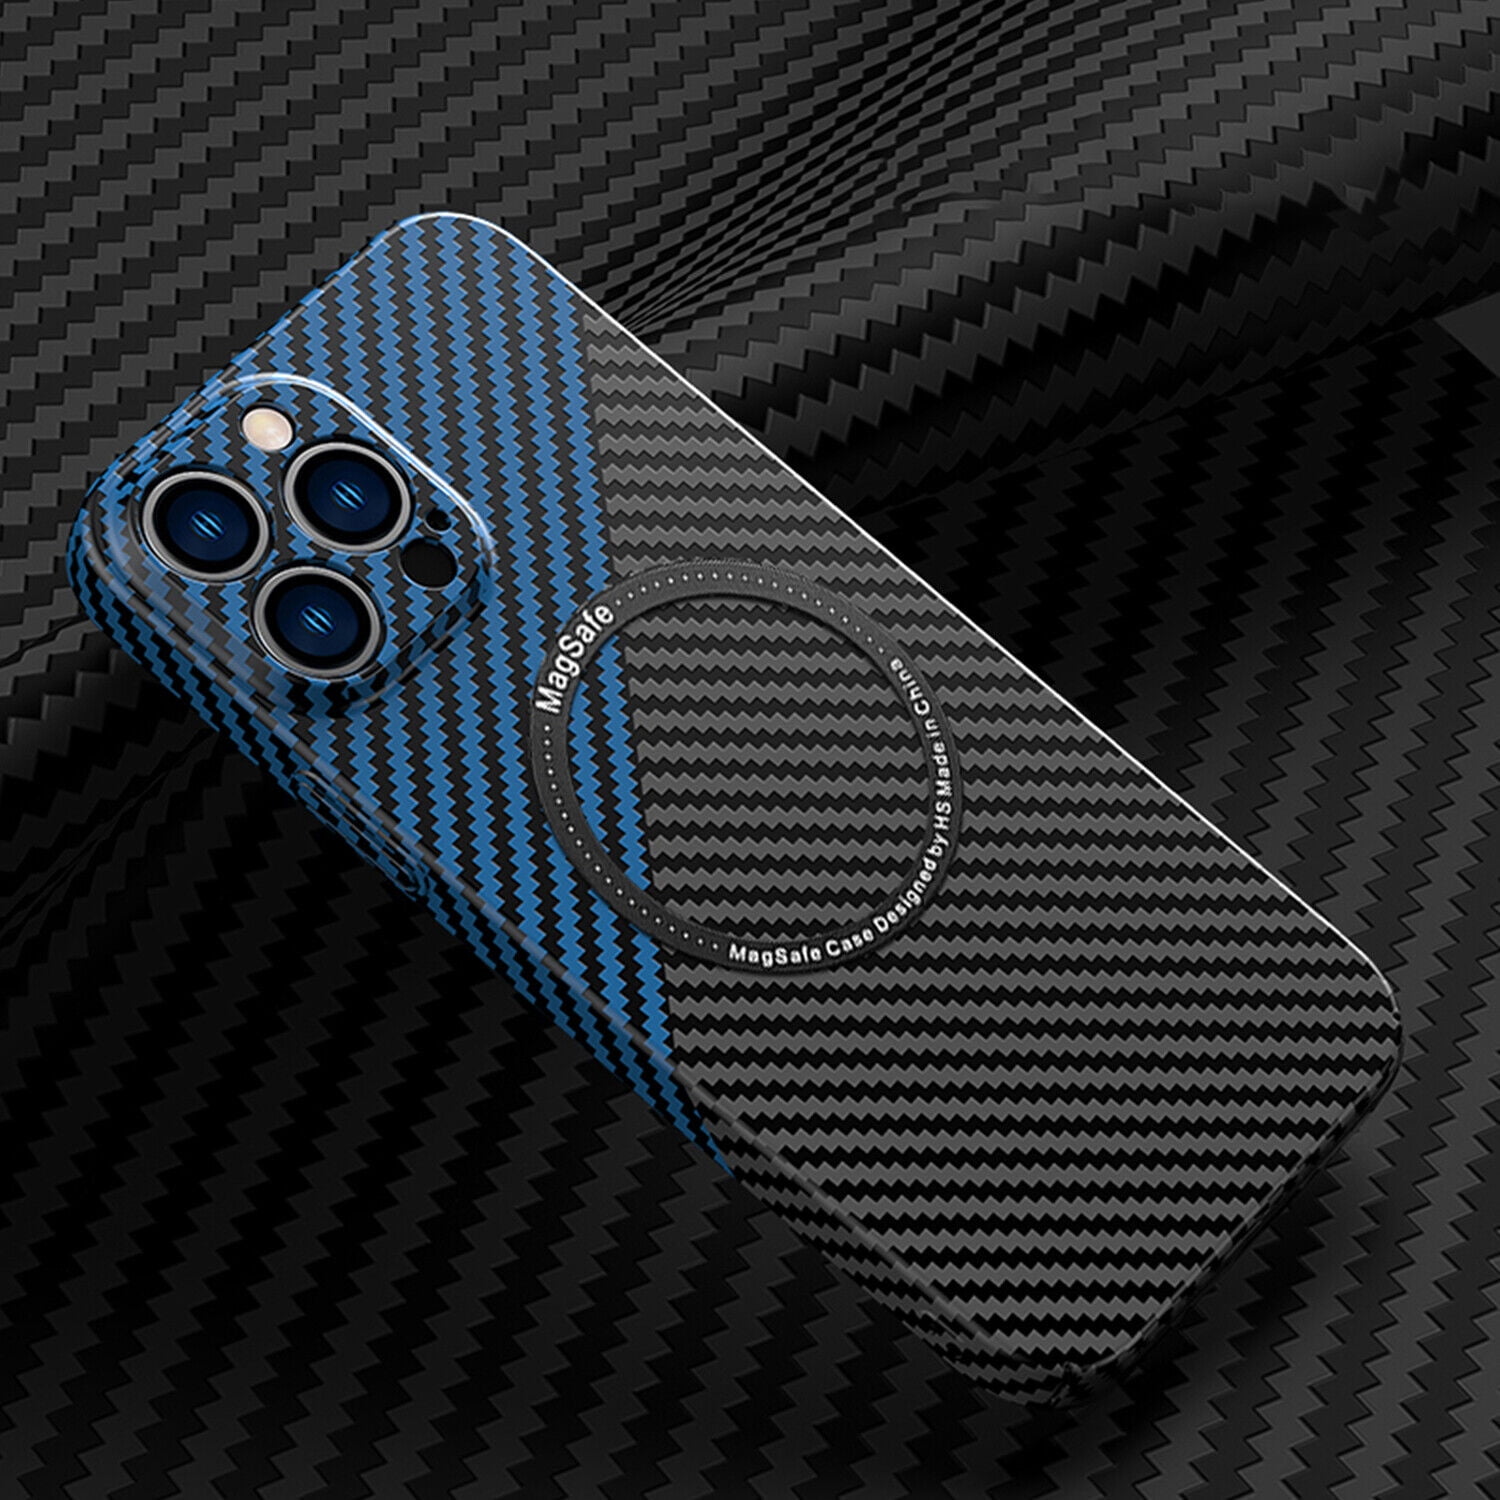 Verschrikkelijk Mand toonhoogte TECH CIRCLE Case for iPhone 12 Pro Max Carbon Fiber Pattern Ultra Slim Thin  Shockproof Protection Compatible with MagSafe For iPhone 12 Pro  Max,Black+Blue - Walmart.com